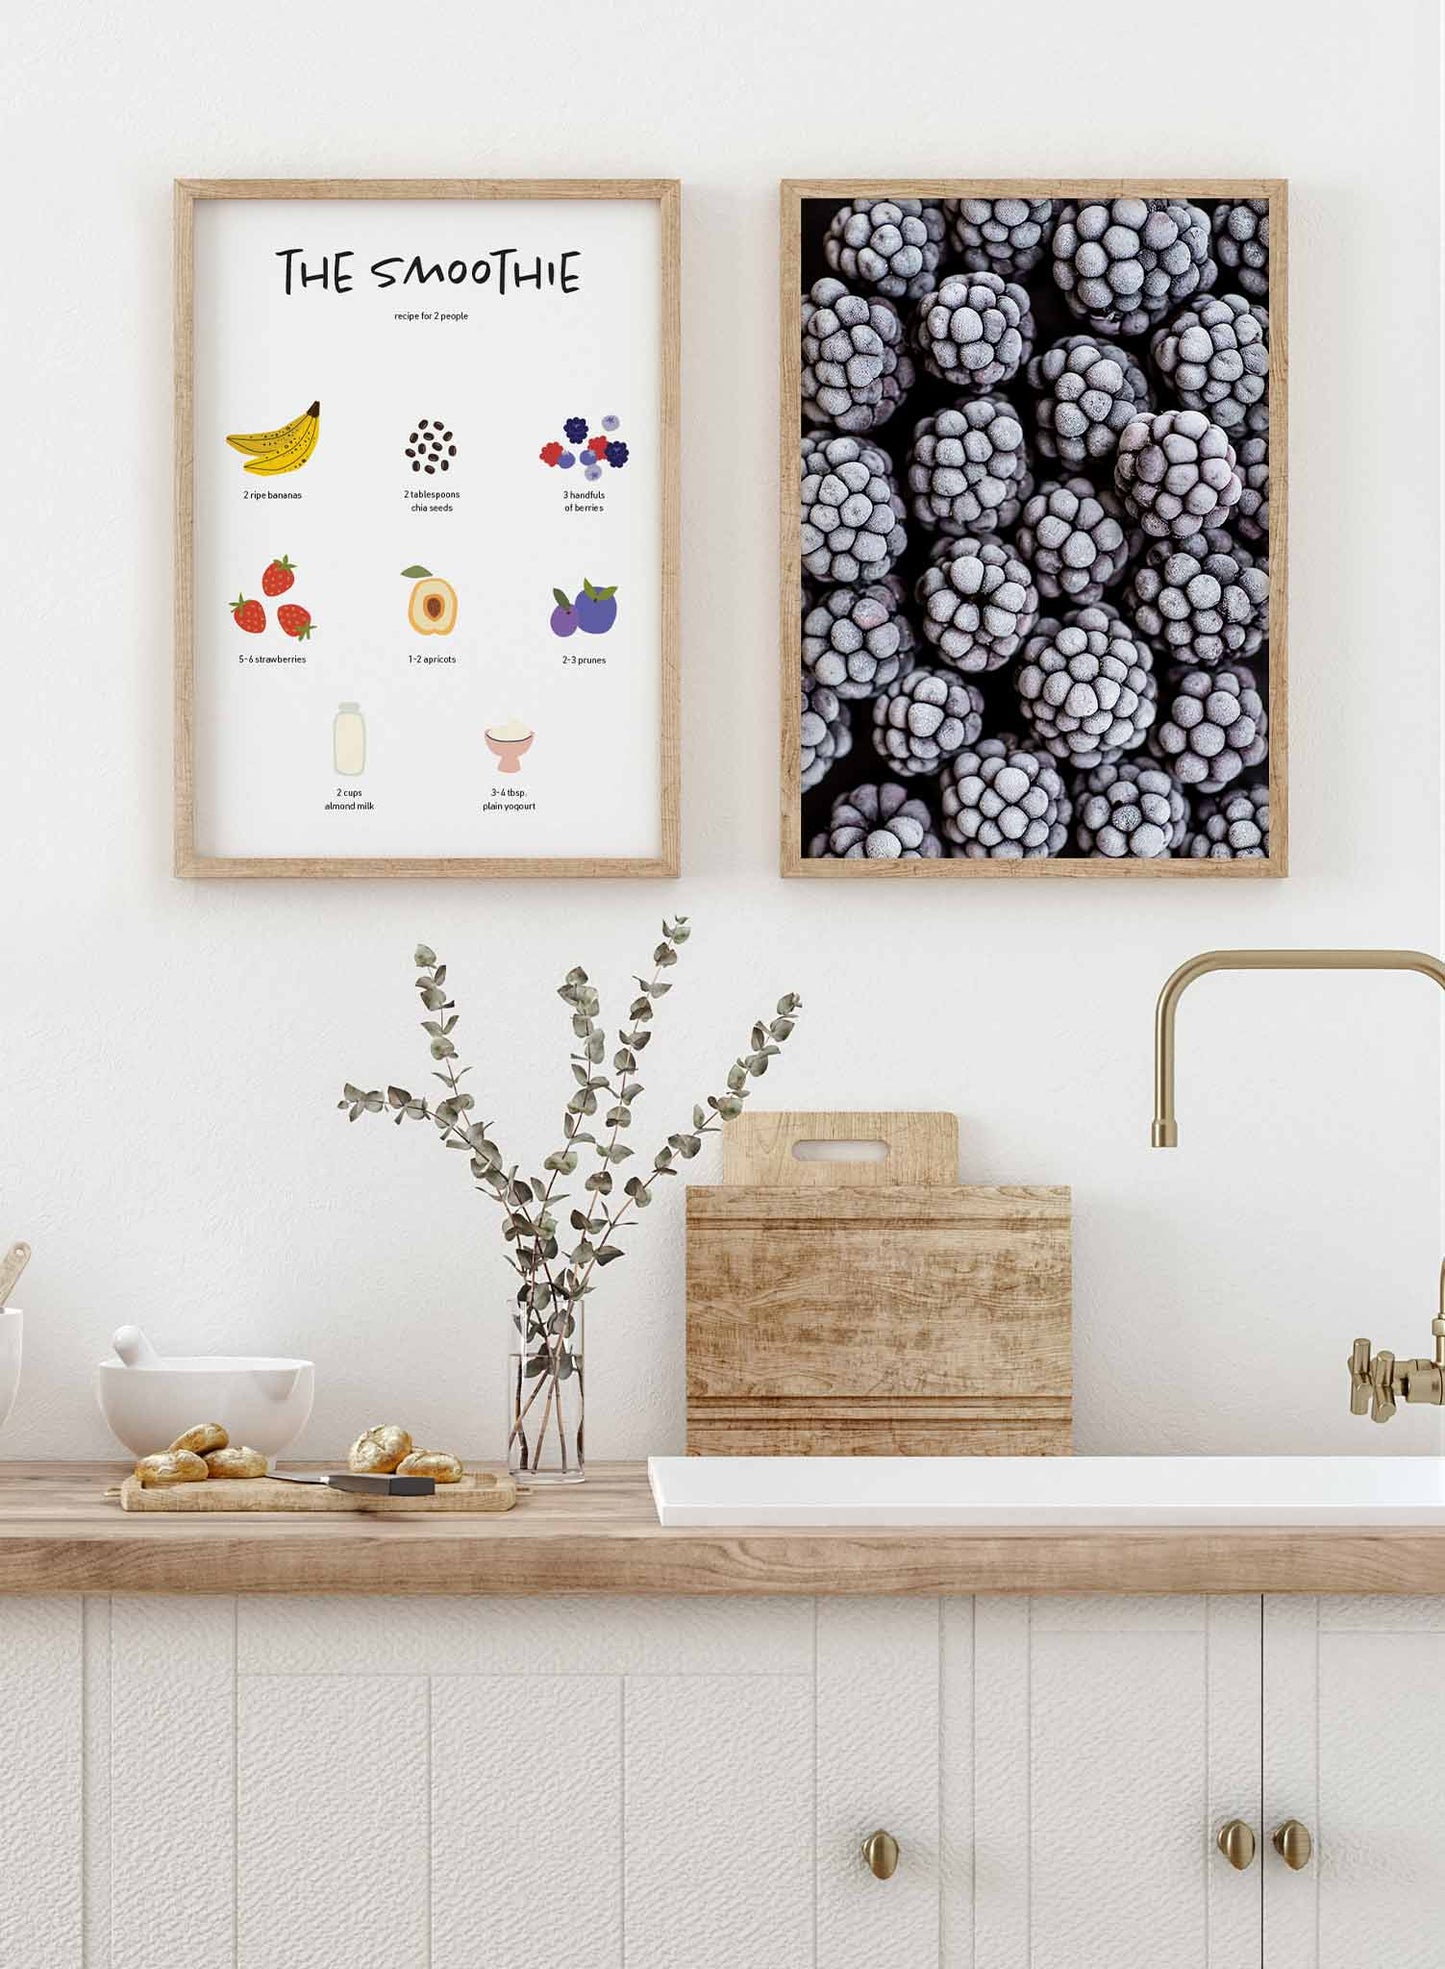 Smoothie Recipe is an illustrated recipe poster by Opposite Wall.